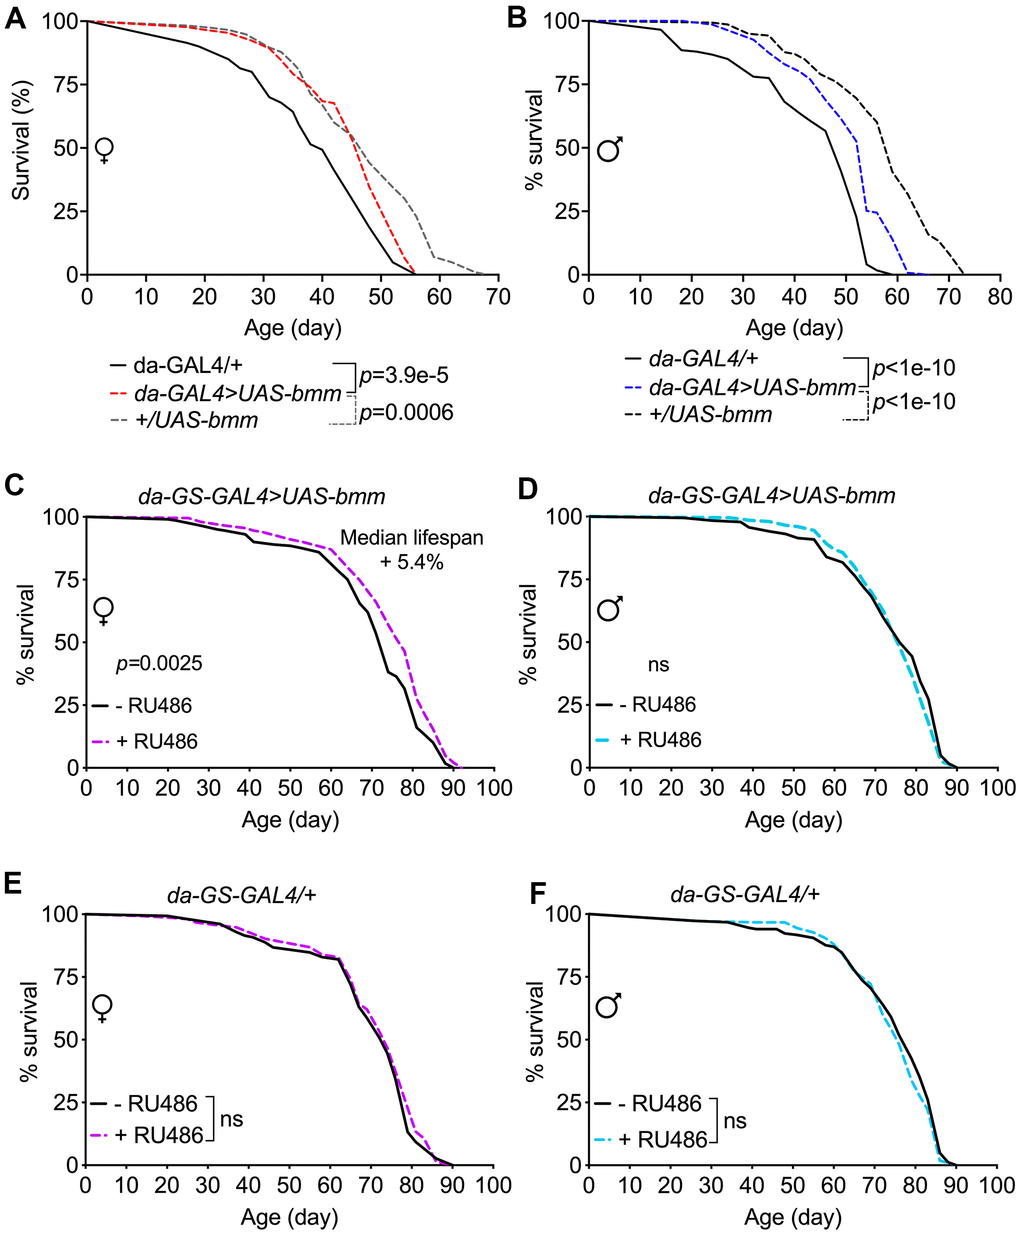 bmm overexpression has marginal effects on lifespan in Drosophila. (A, B) Kaplan-Meier curves of da-GAL4>UAS-bmm vs. control da-GAL4/+ and +/UAS-bmm flies. (C, D) Kaplan-Meier curves of inducible da-GS-GAL4>UAS-bmm with or without 50 μM RU486 induction. (E, F) Kaplan-Meier curves of inducible da-GS-GAL4/+ control flies with or without 50 μM RU486 induction. n for each group and p-value by log-rank analysis are listed in Supplementary Table 1.